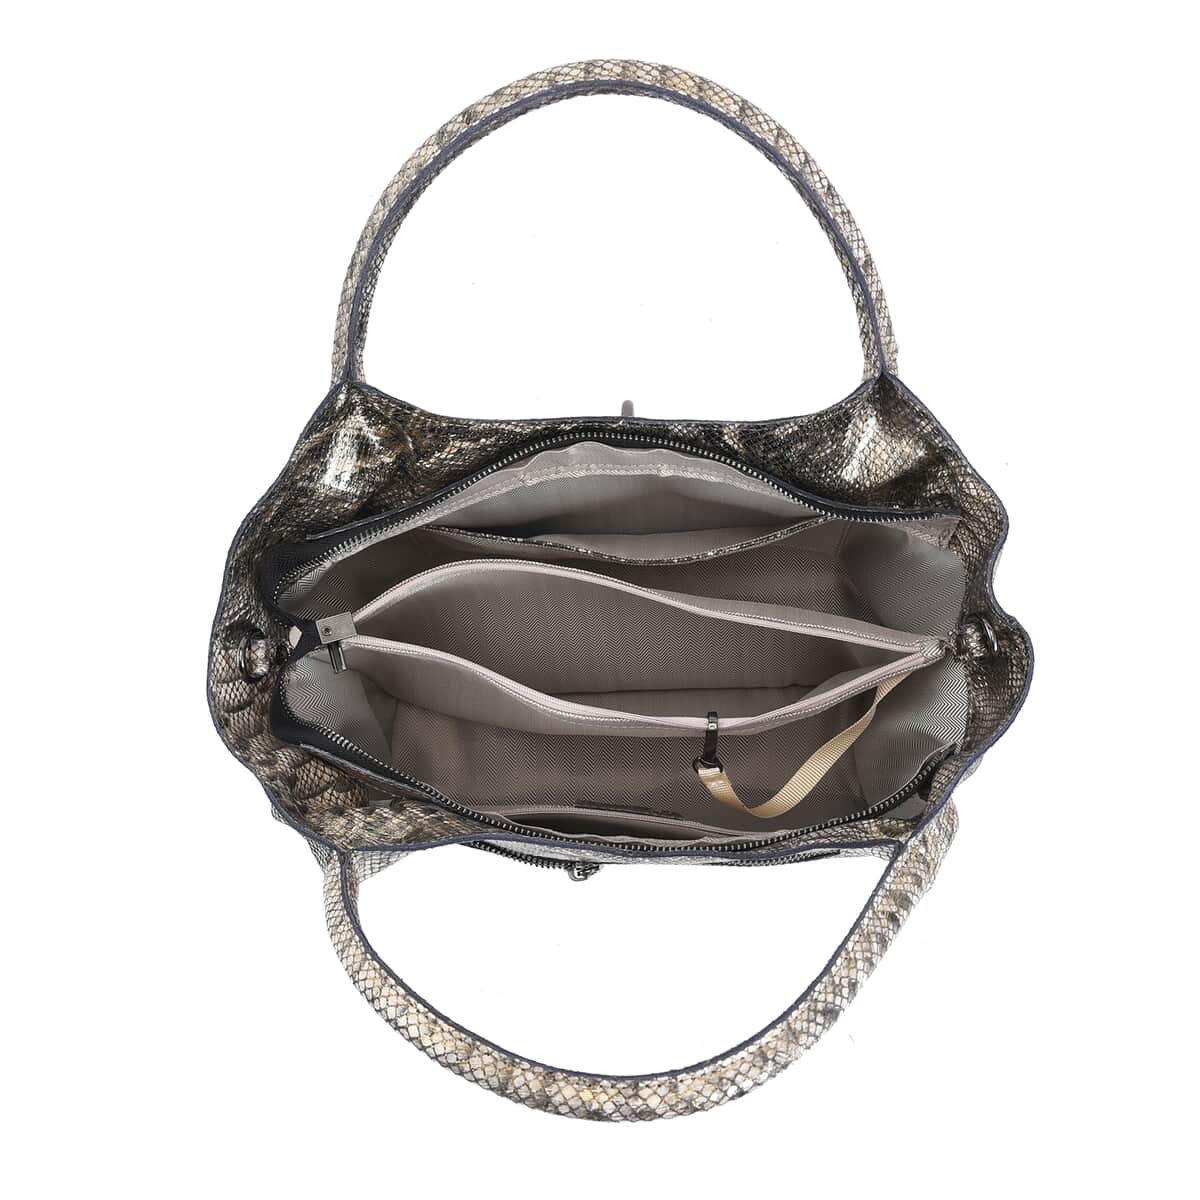 Gold and Black Snake Print Genuine Leather Hobo Bag (11"x6"x9") with 47" Detachable Shoulder Strap and 7" Handle Drop image number 5